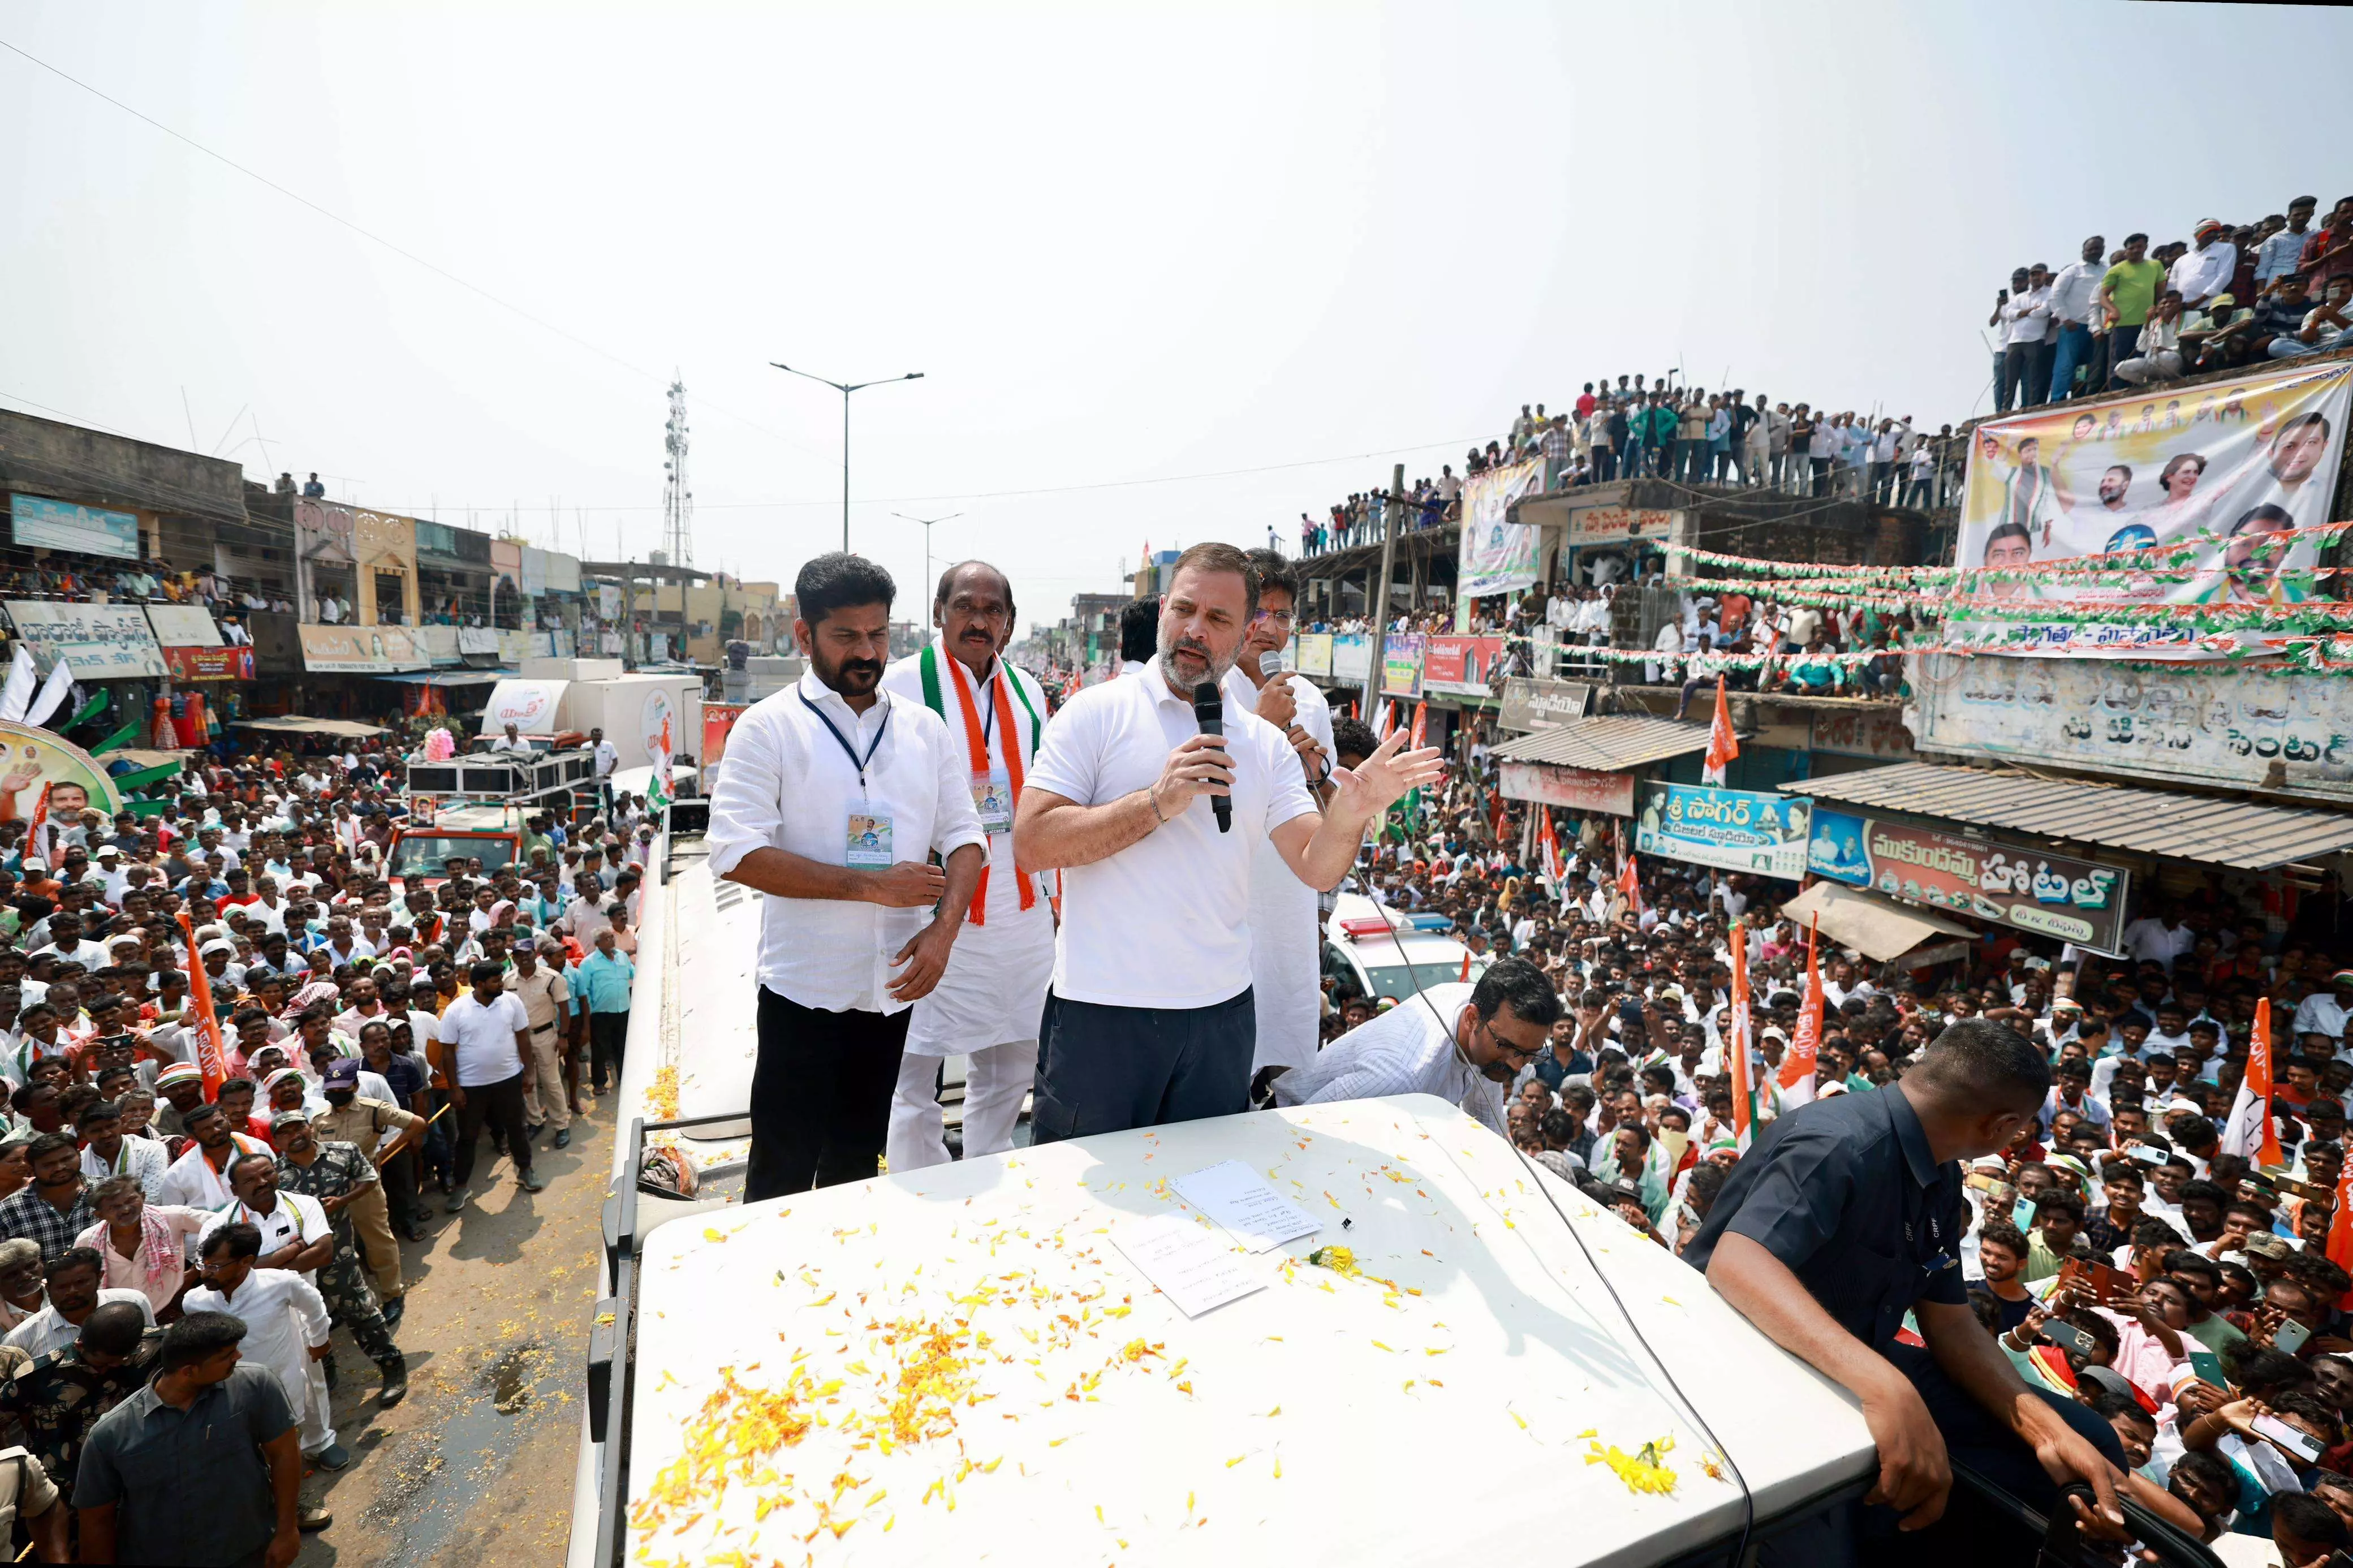 Congress will take up caste census, if voted to power: Rahul Gandhi